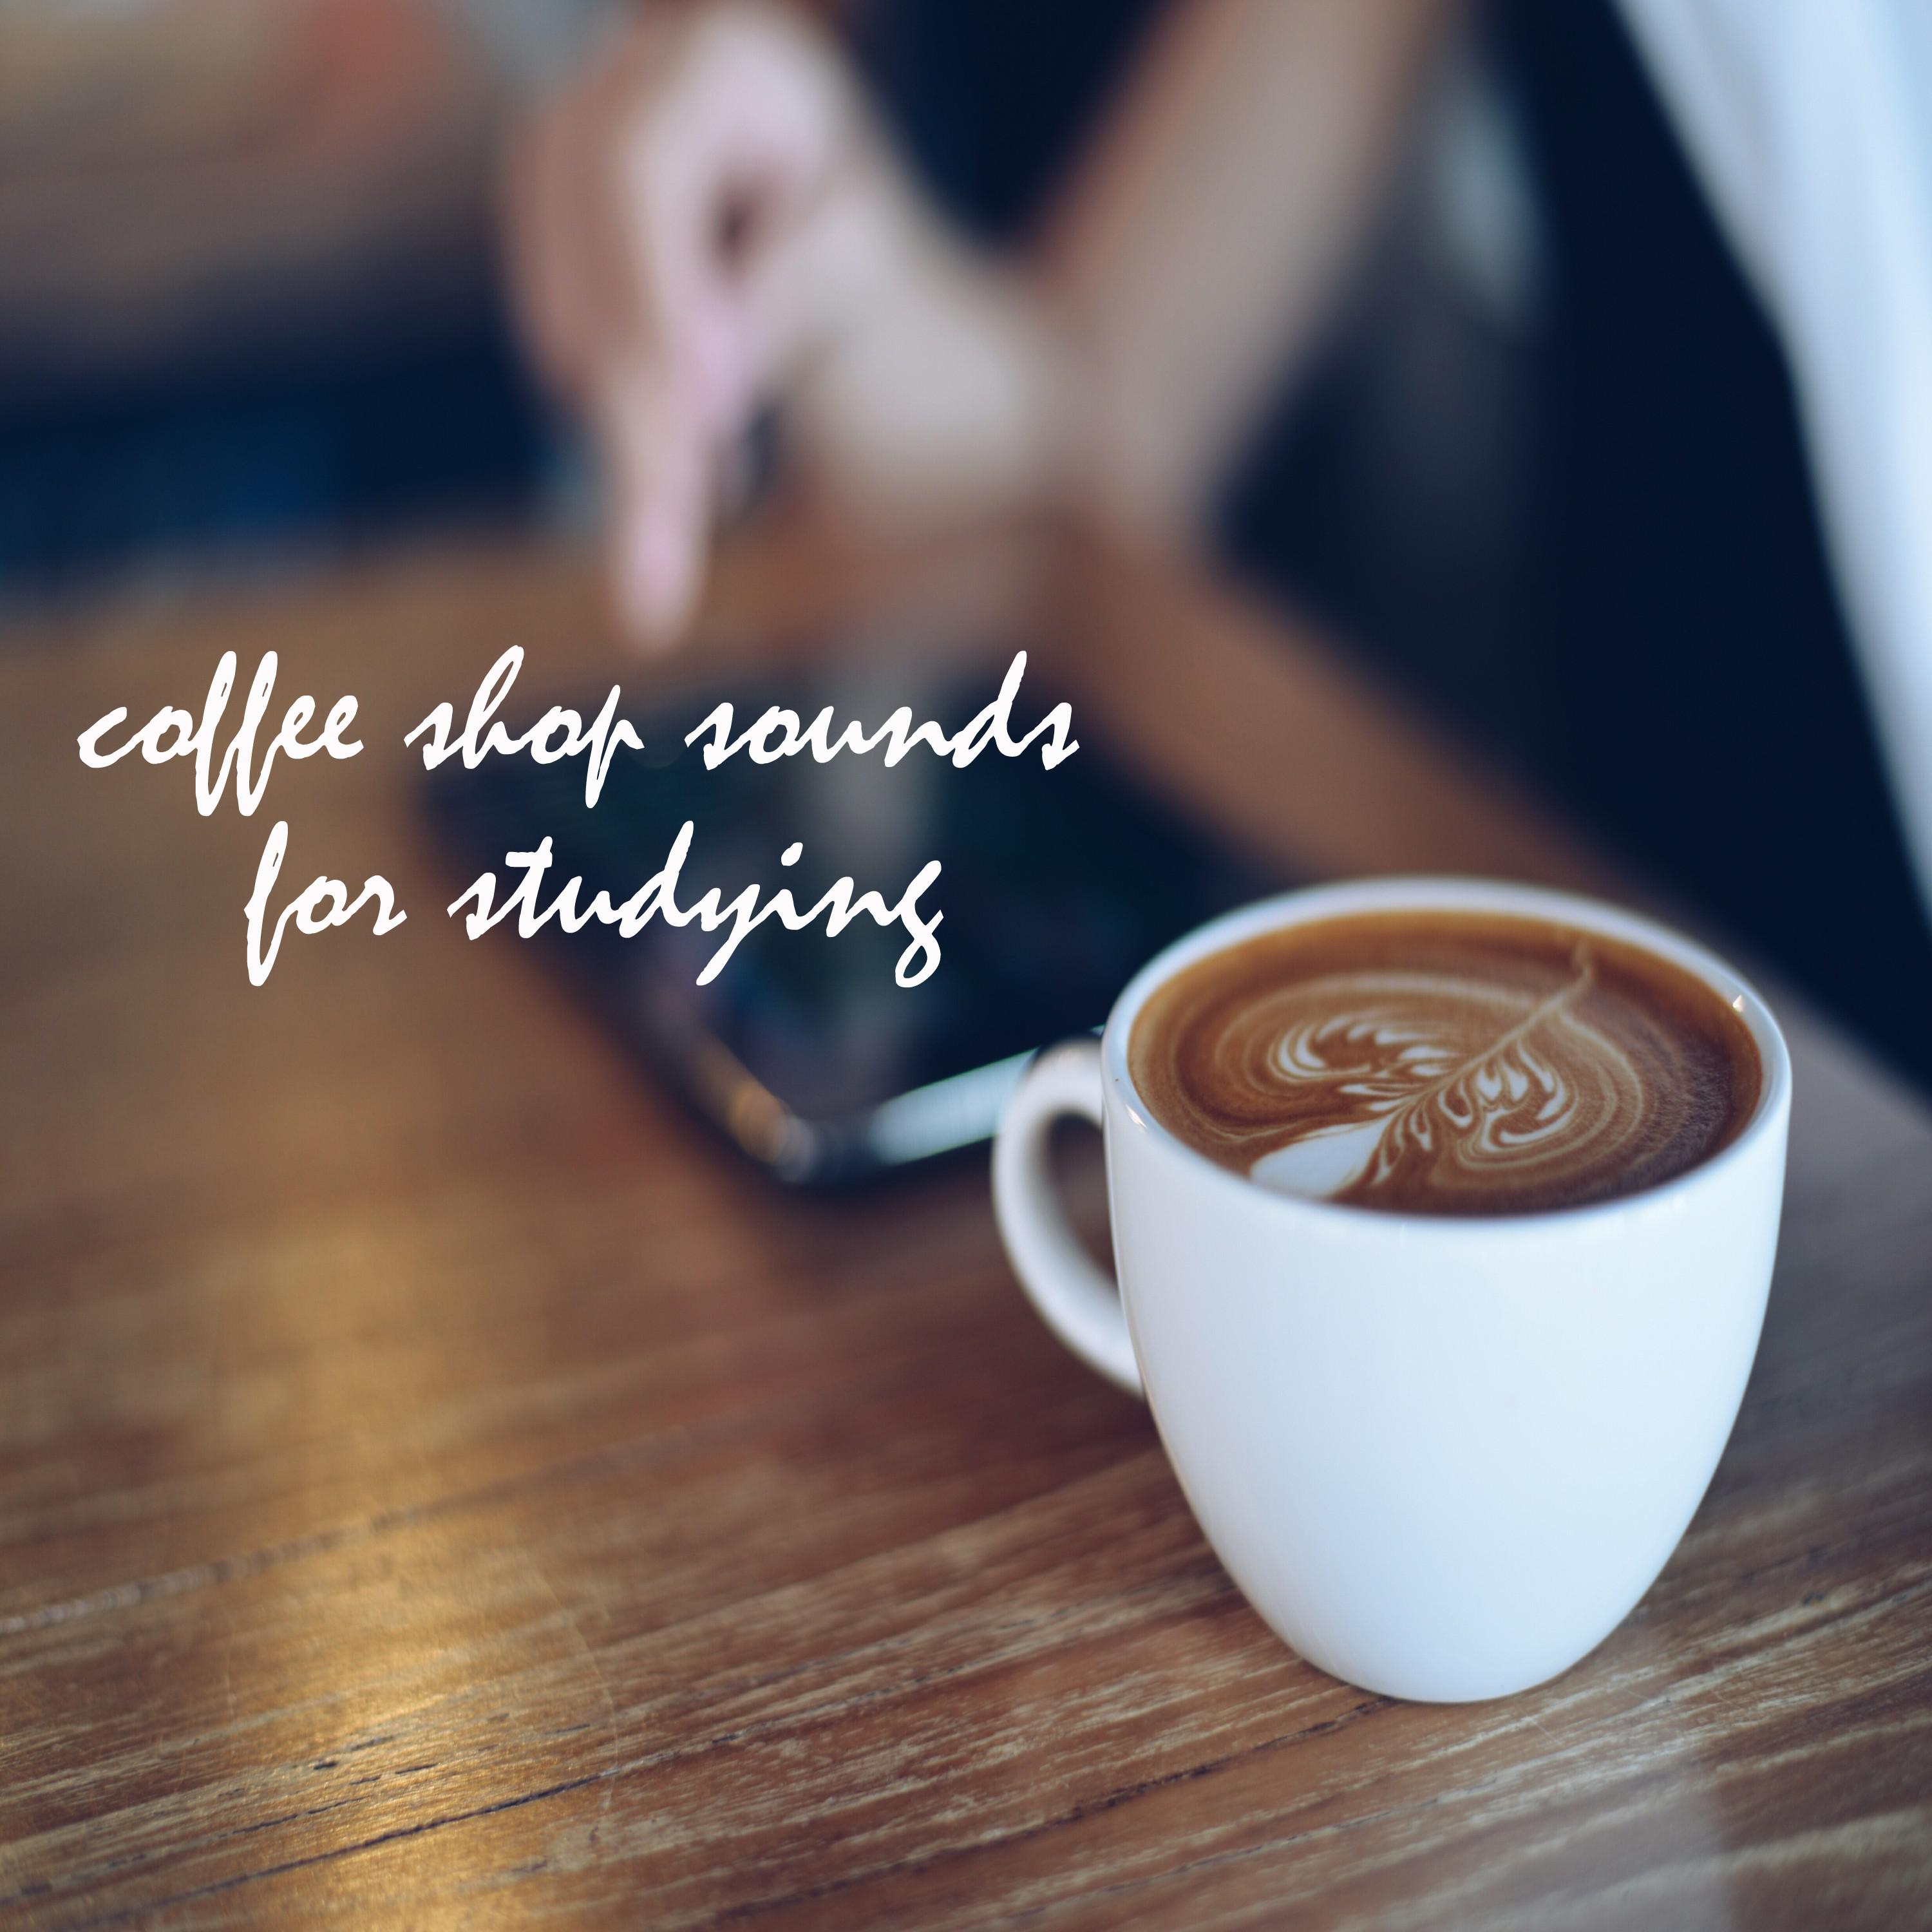 Coffee Shop Sounds for Studying and Working, Pt. 48